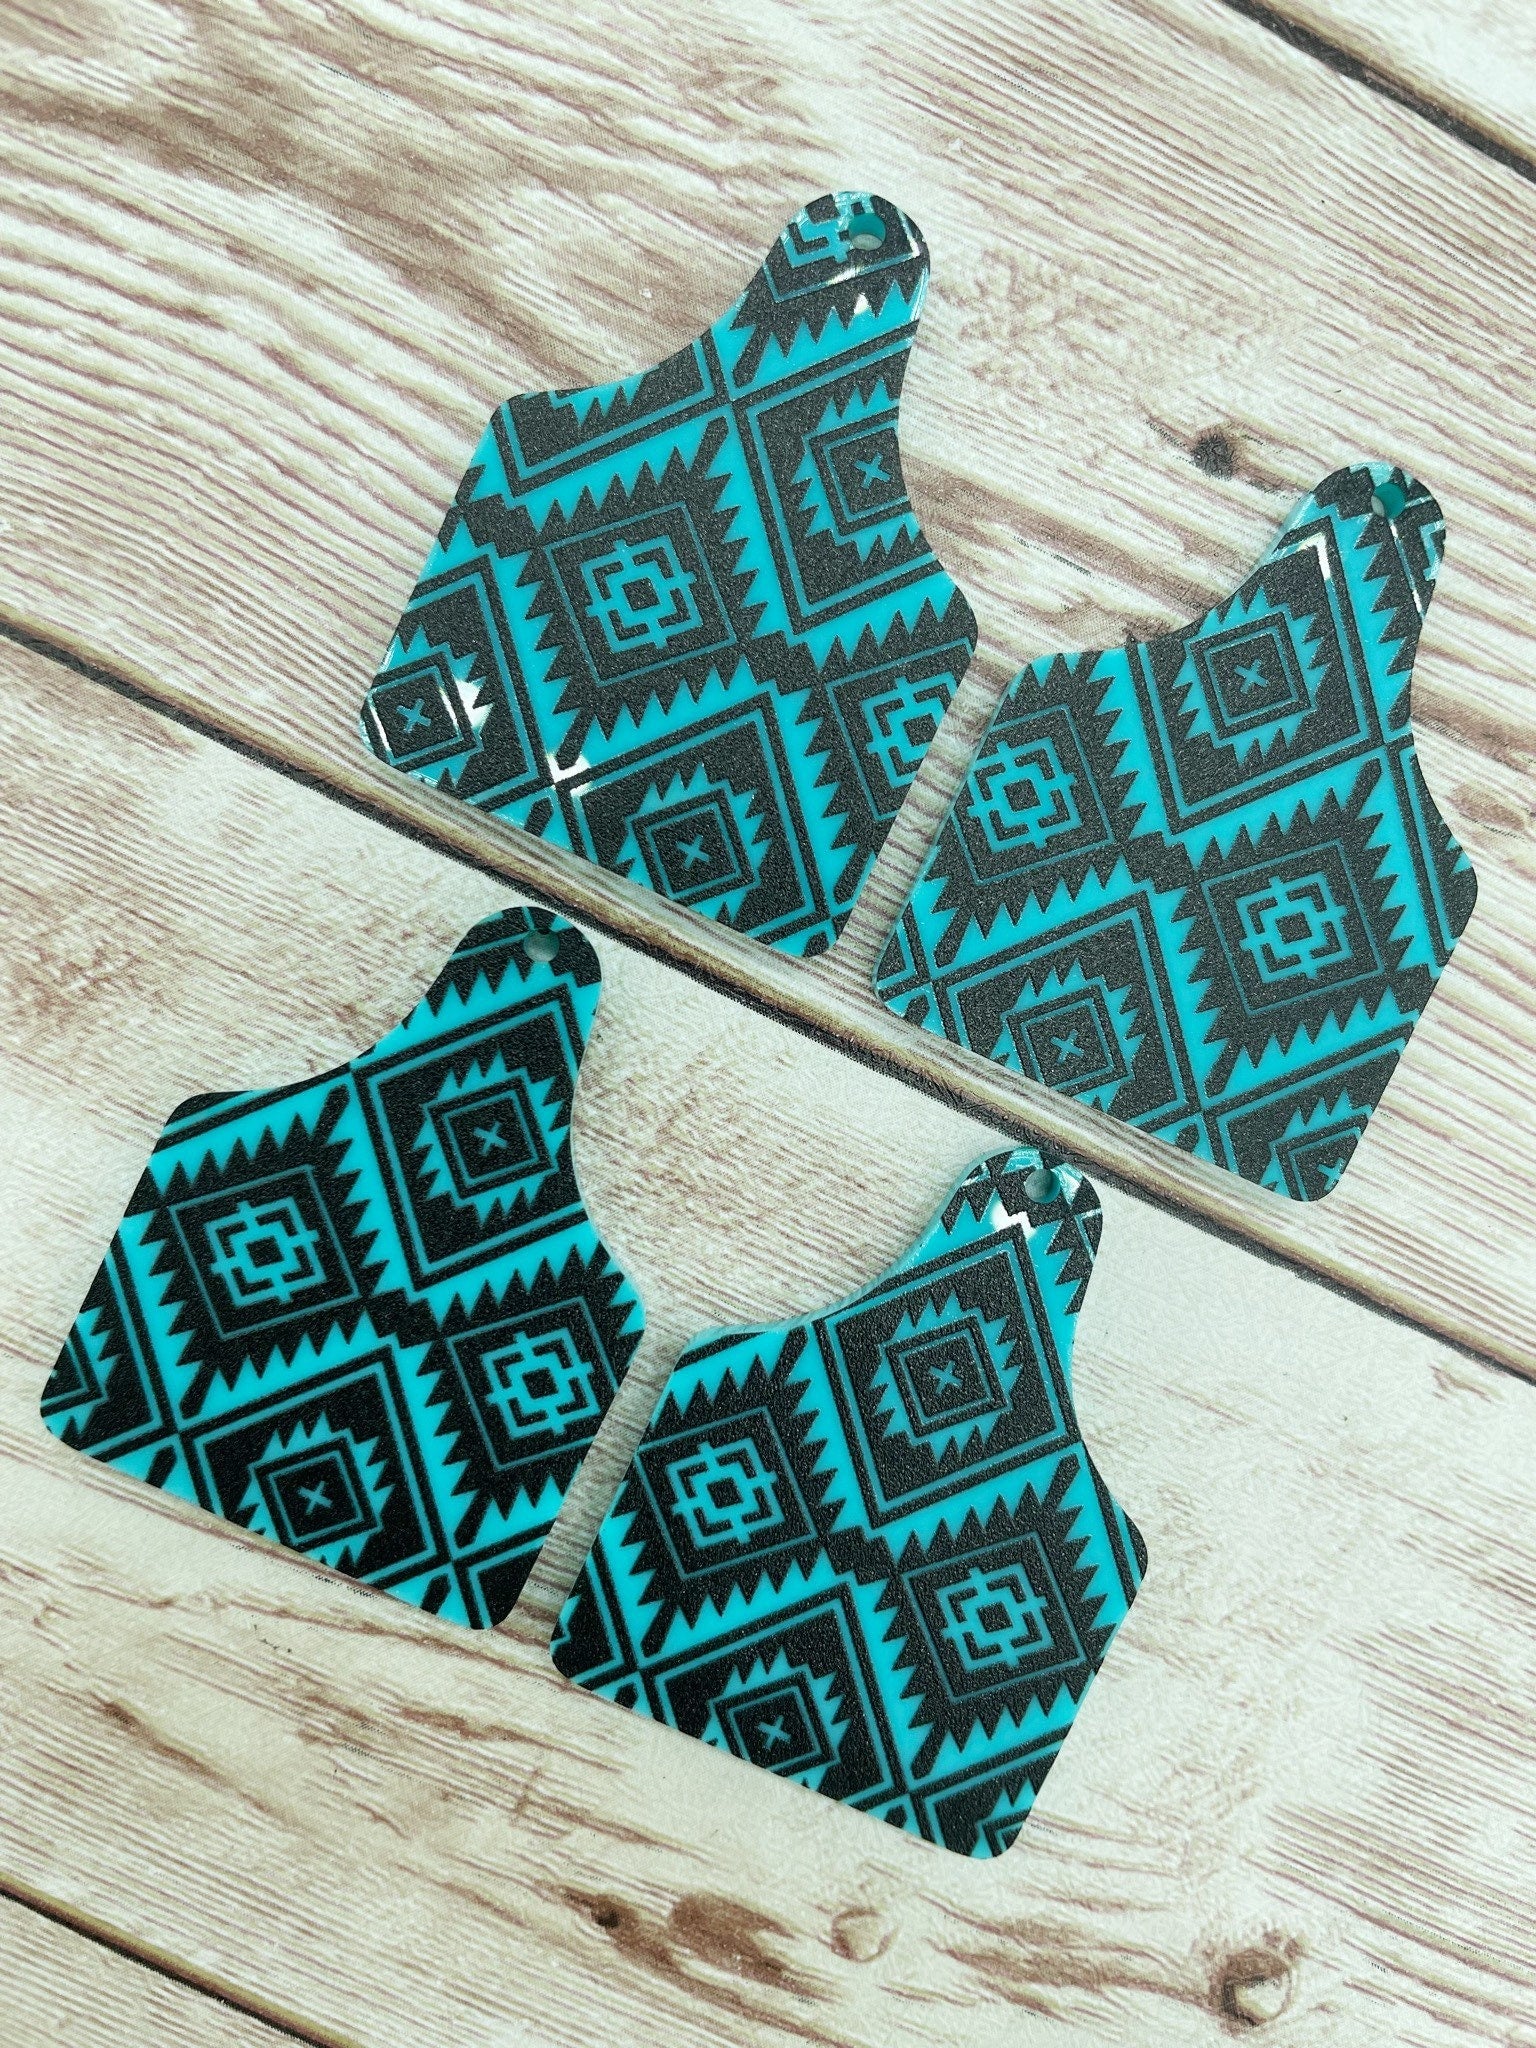 Patterned Teal Acrylic Aztec Print Cow Tag Earring Blanks, DIY Jewelry Making